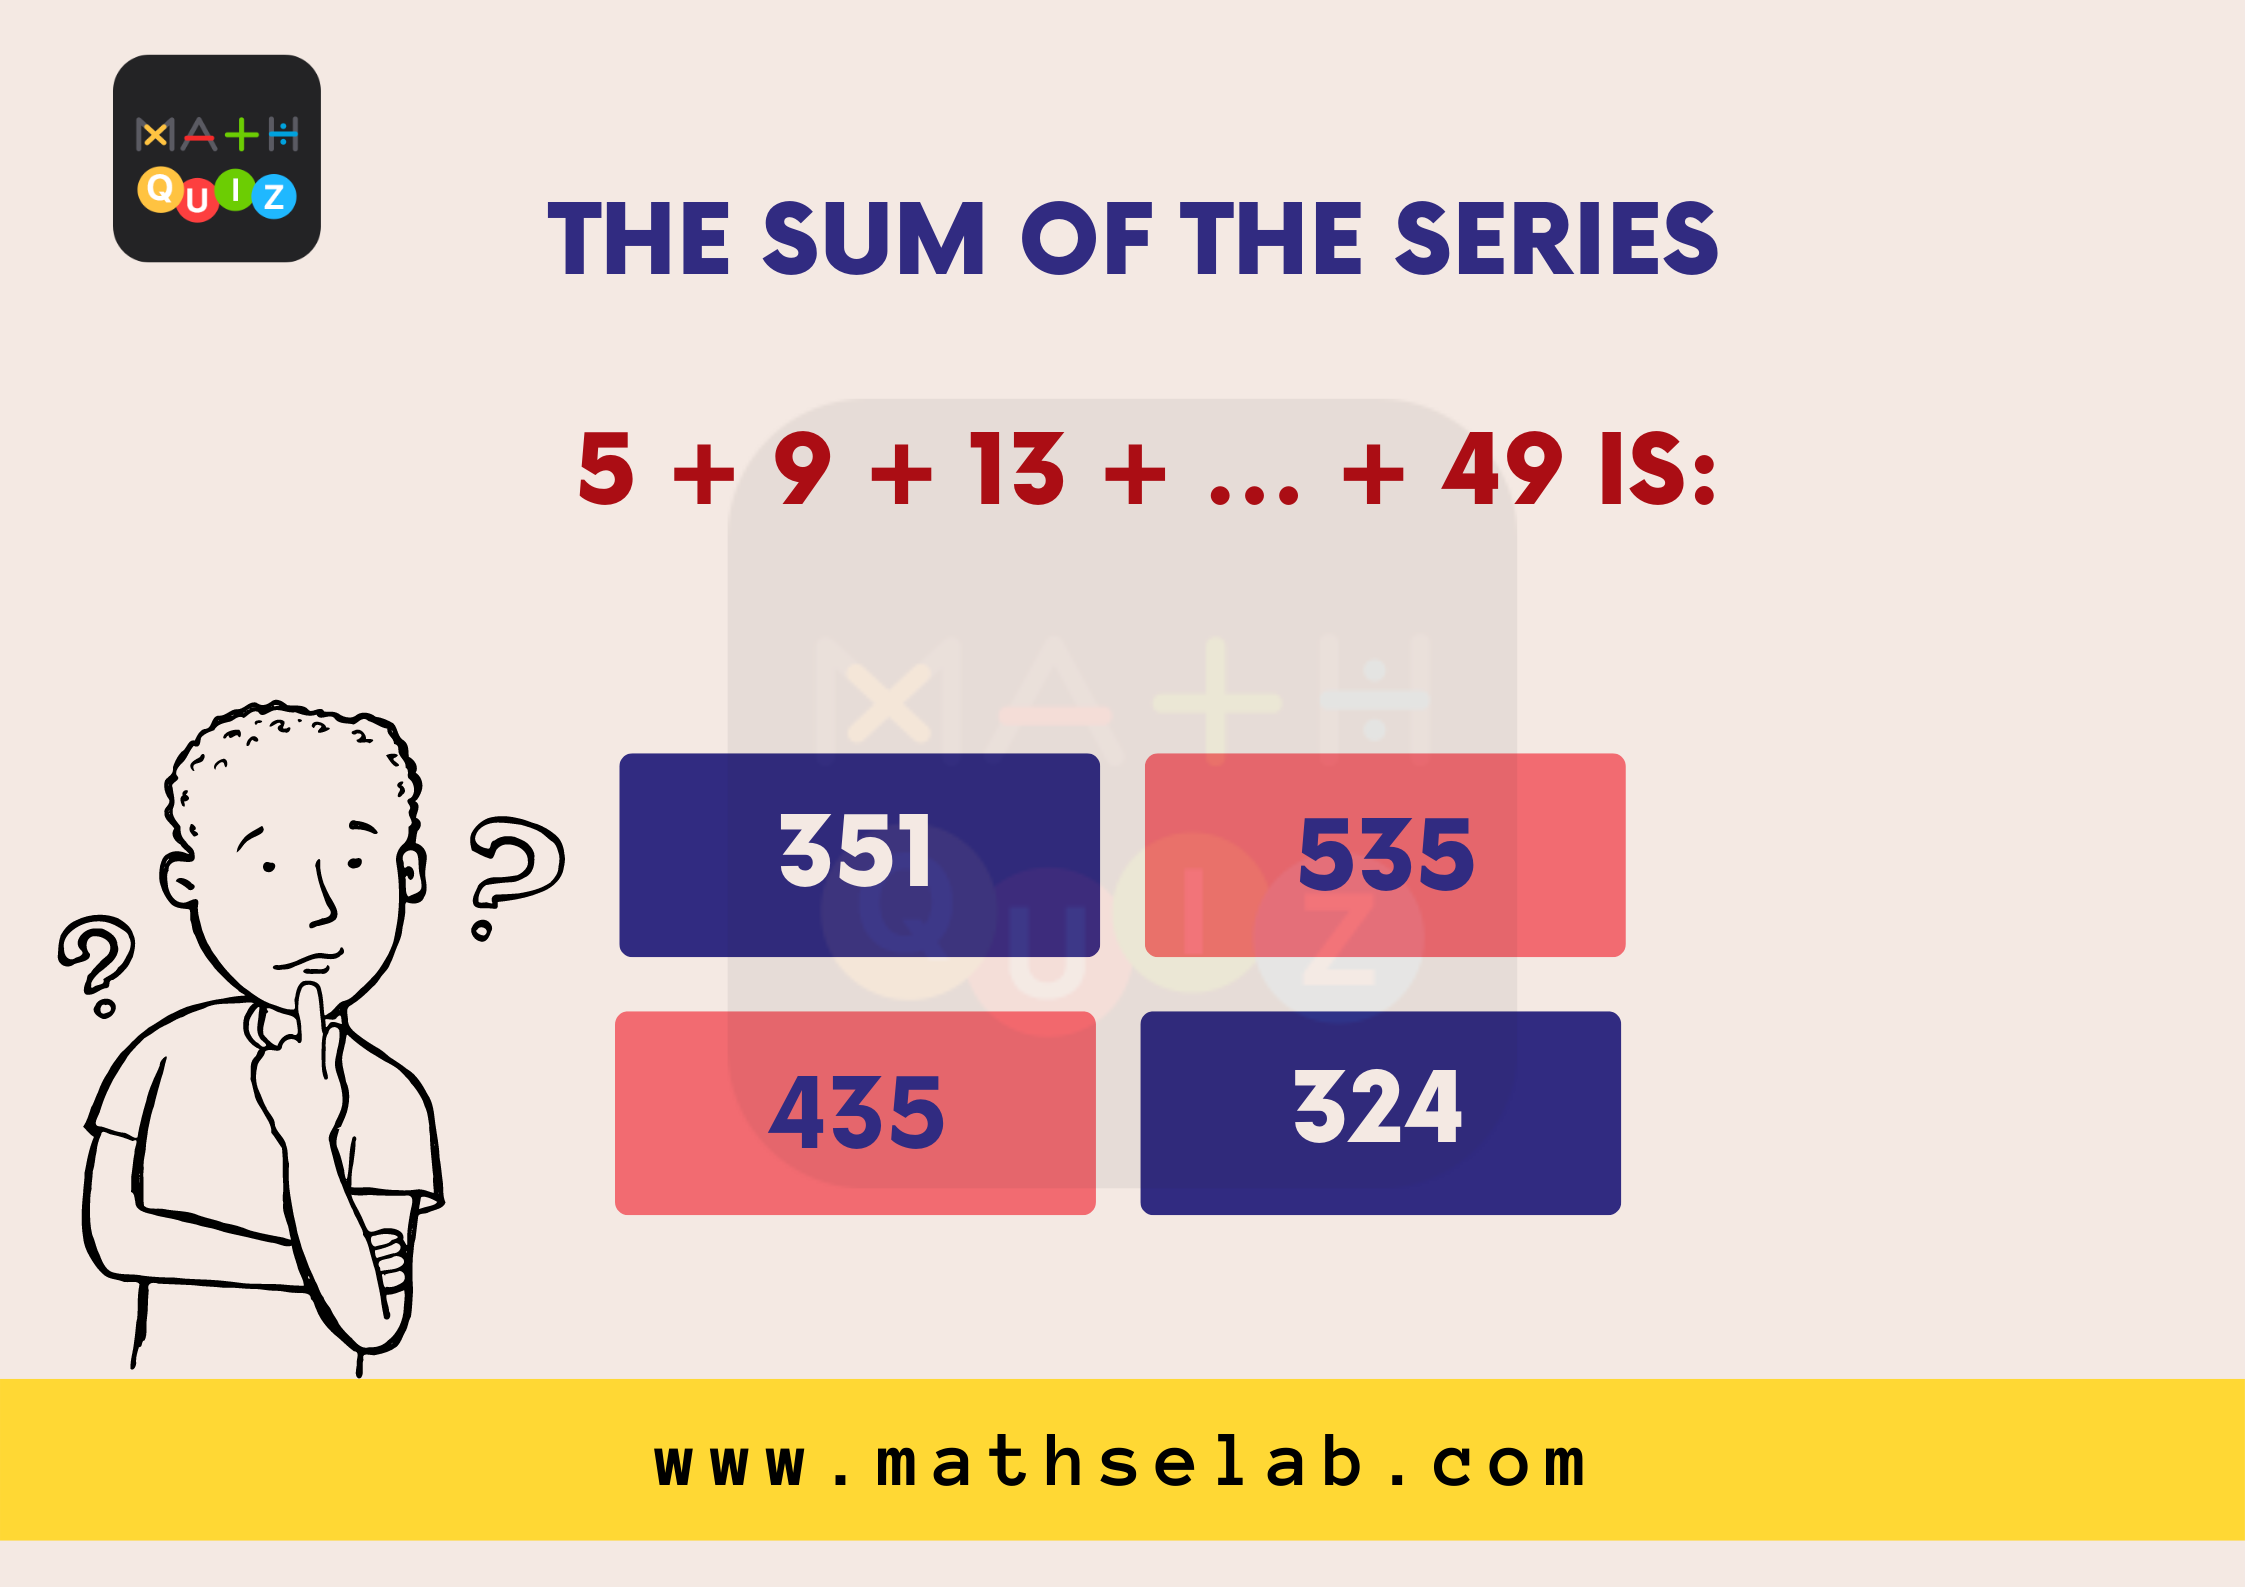 The sum of the series 5 + 9 + 13 + … + 49 is: